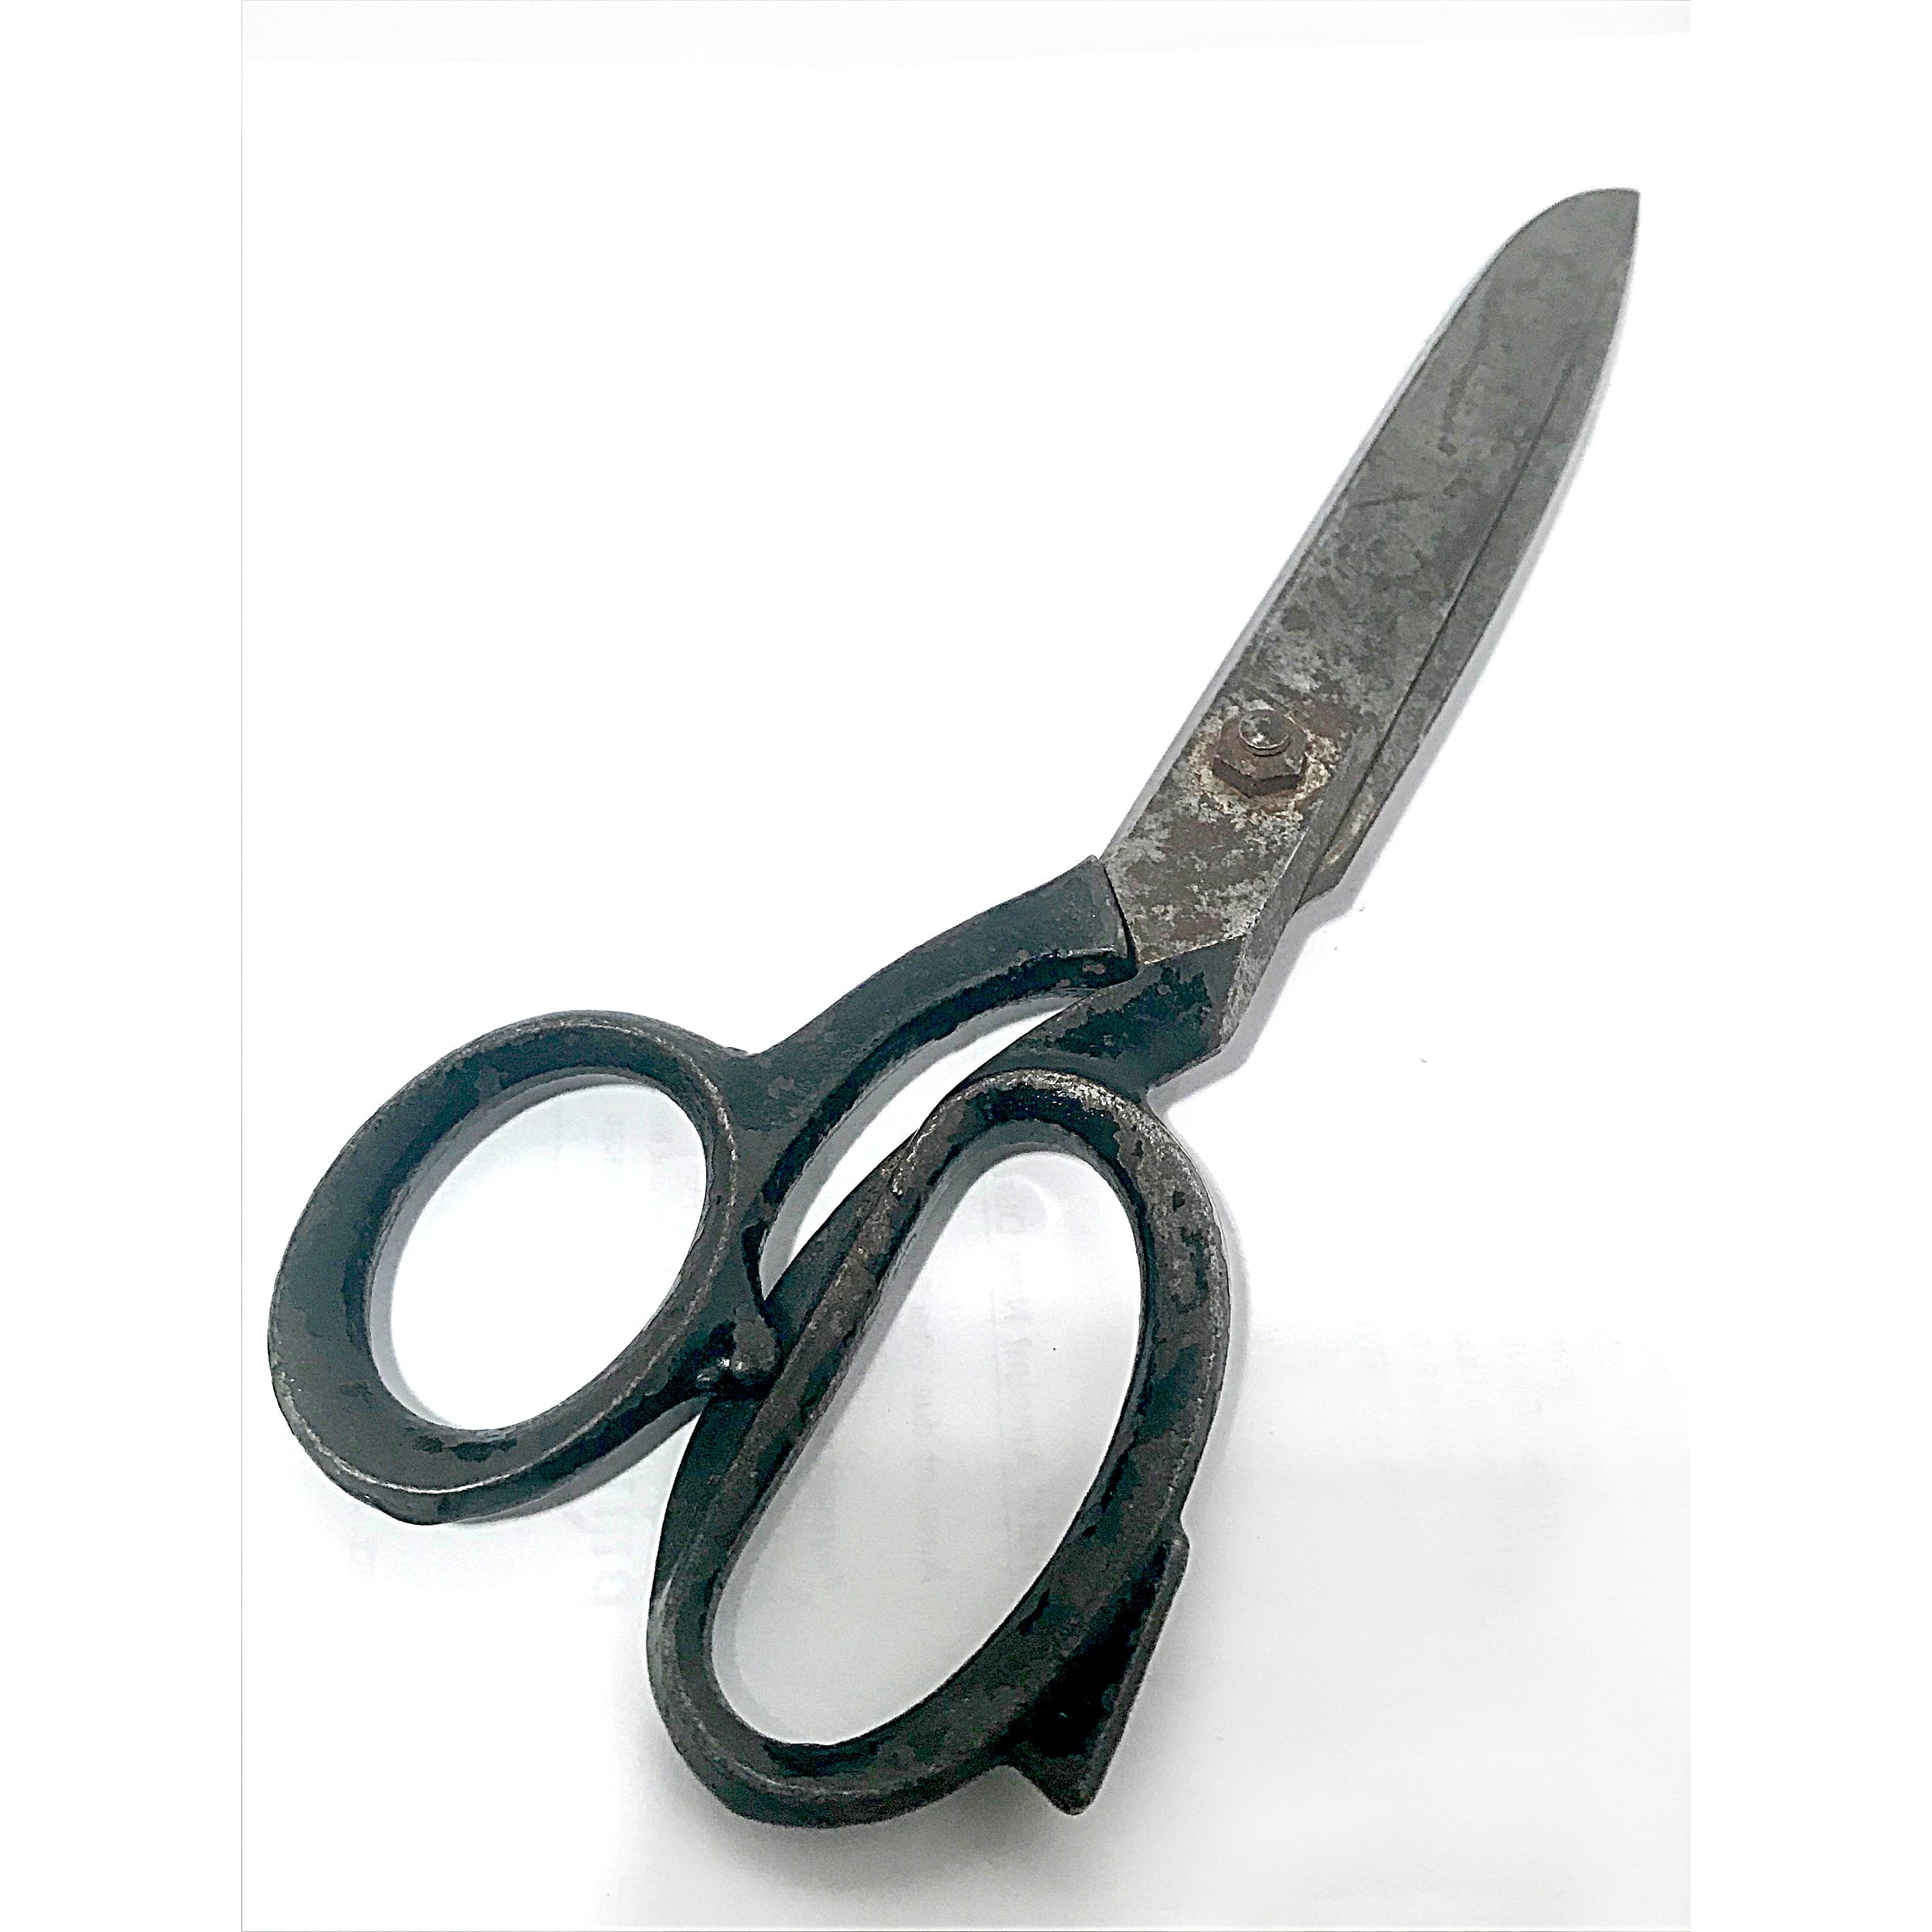 Spanish desk scissors in wrought and engraved iron, dated 1692 - Ref.78746